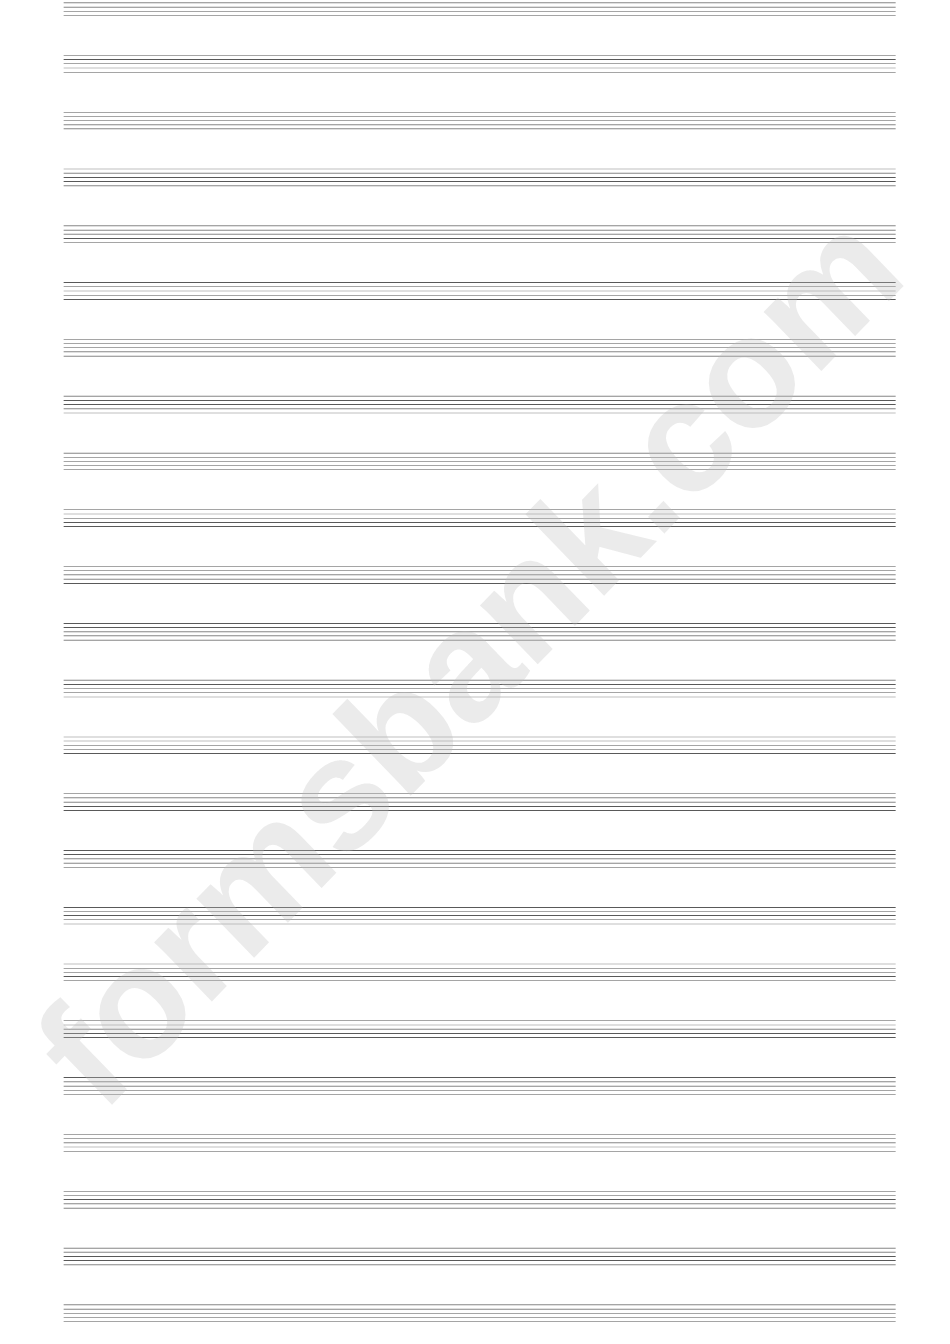 25-Stave With No Clef To One Page (Us Legal - 8.5" X 14" Portrait) Blank Sheet Music